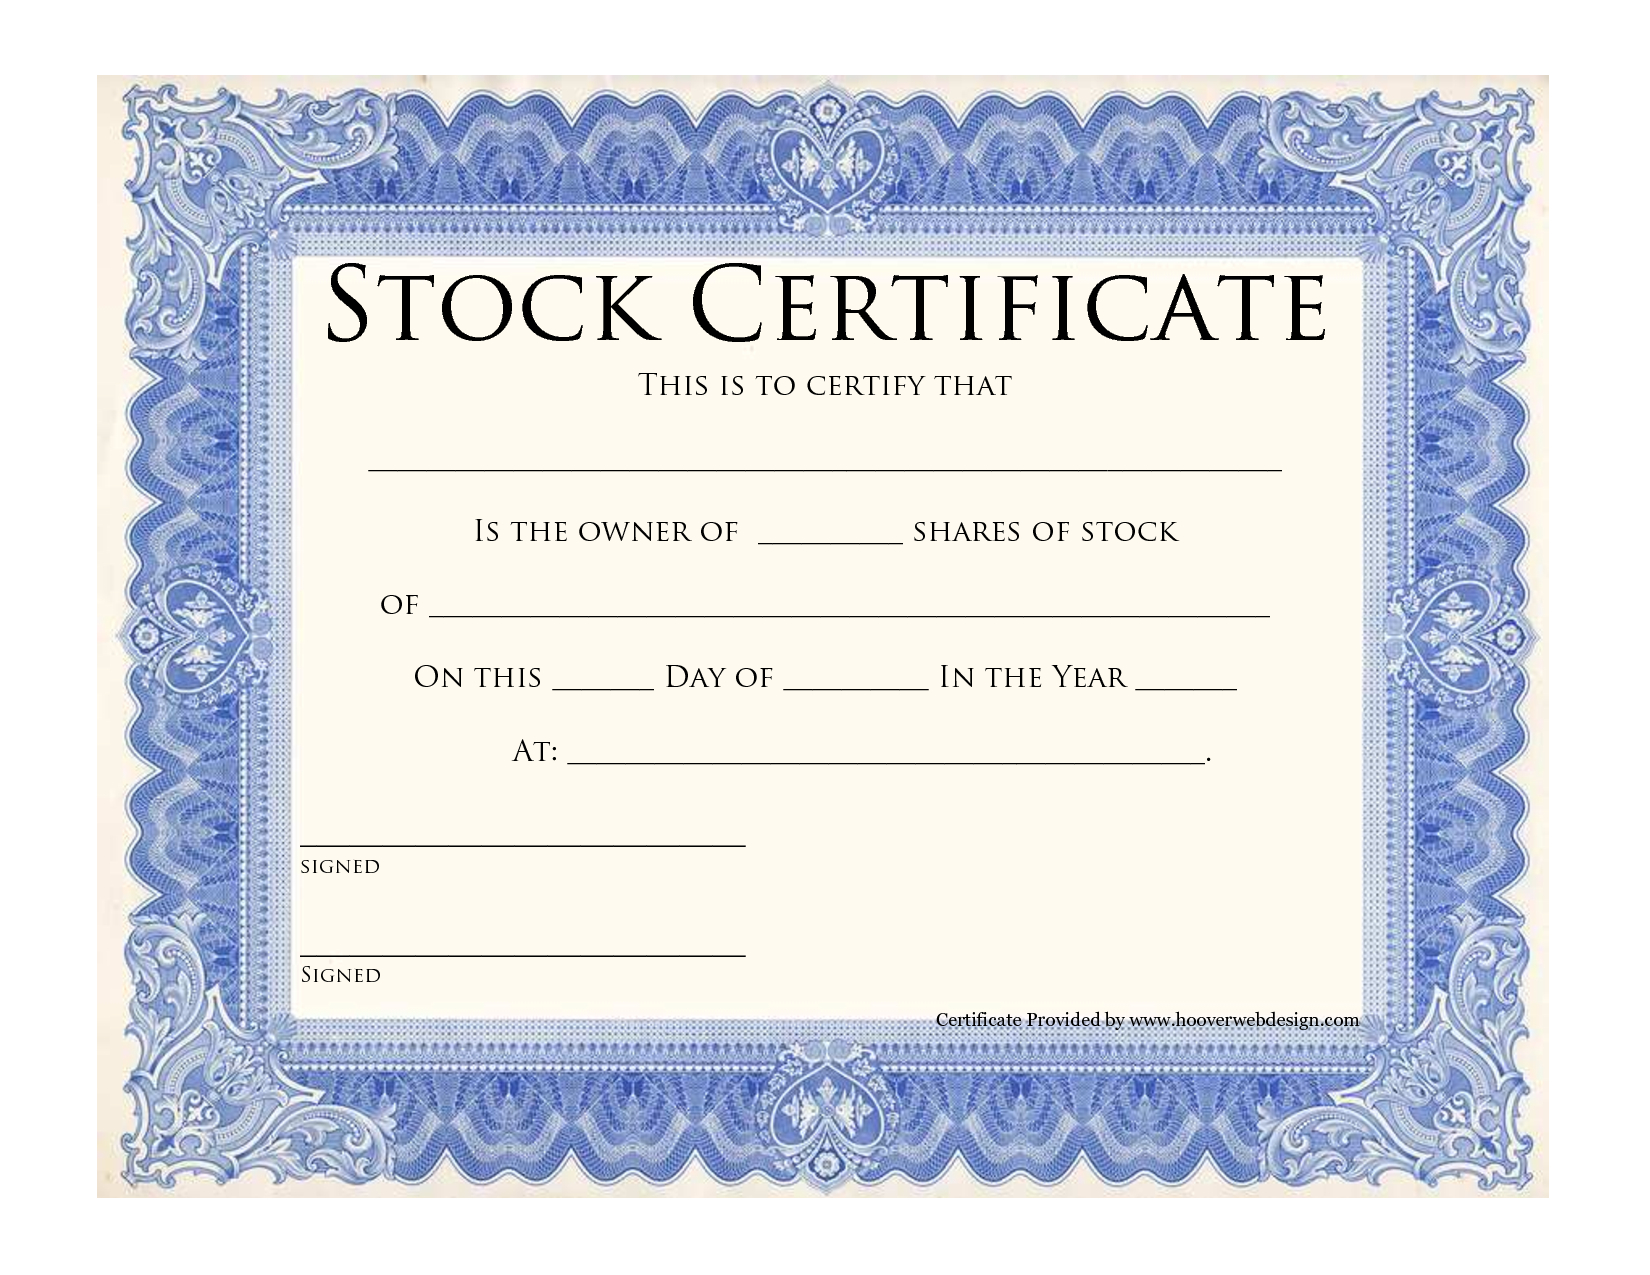 10+ Share Certificate Templates | Word, Excel & Pdf With Stock Certificate Template Word